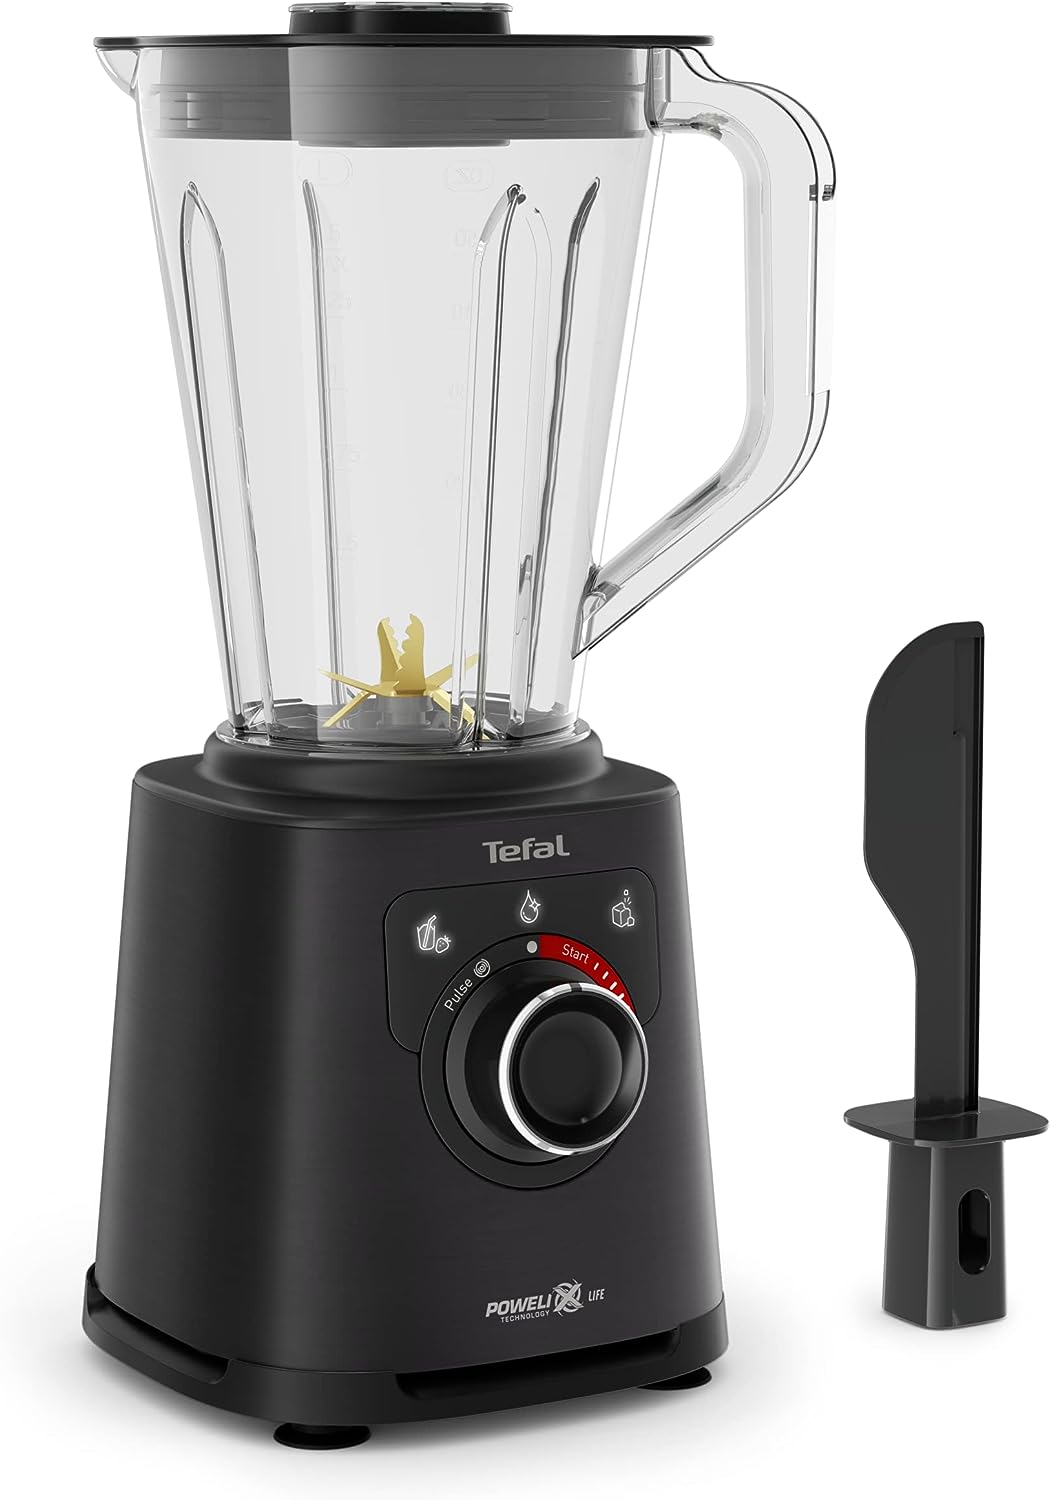 http://honestforwarder.com/uploads/product/IQp5Ty6HB9-tefal-perfectmix-high-speed-blender-powelix-life-technology-for-quick-results-easy-to-clean-powerful-glare-2l-lightweight-and-shatterproof-tritan-jug-bl88a83117.jpg